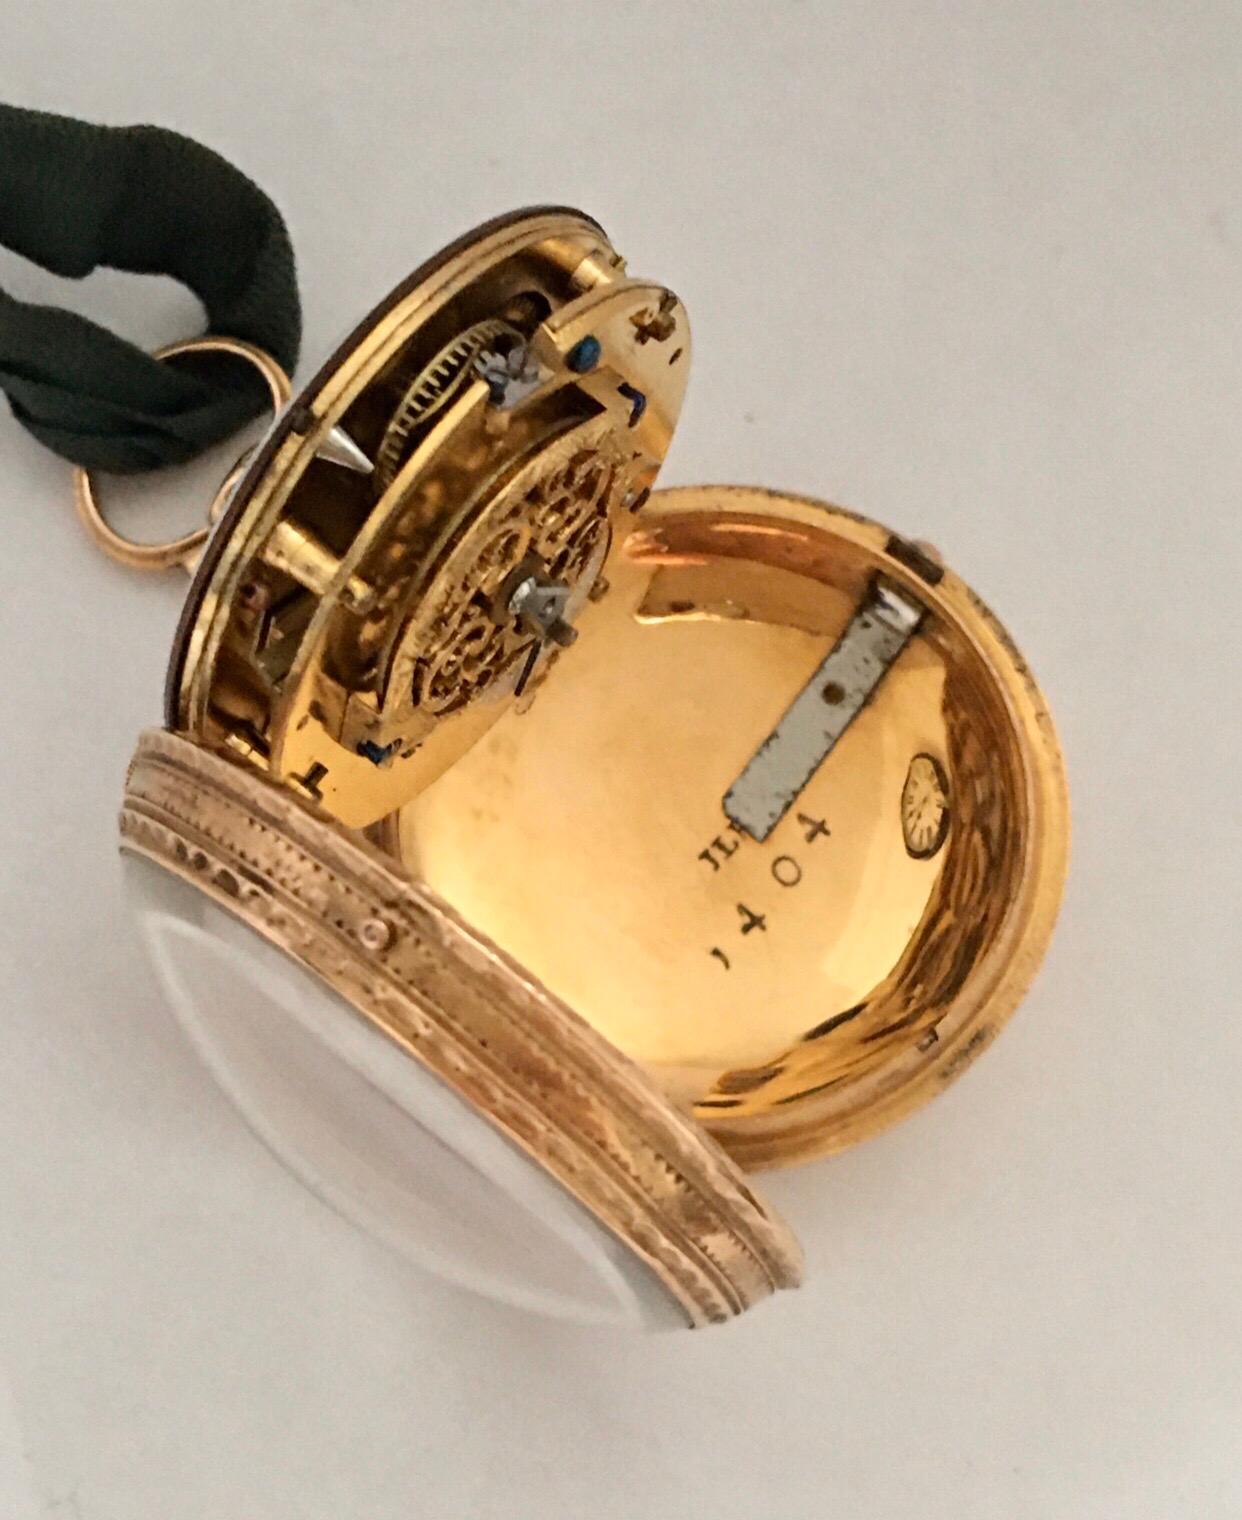 Early and Rare Verge Fusee 18 Karat Gold Pocket Watch For Sale 1